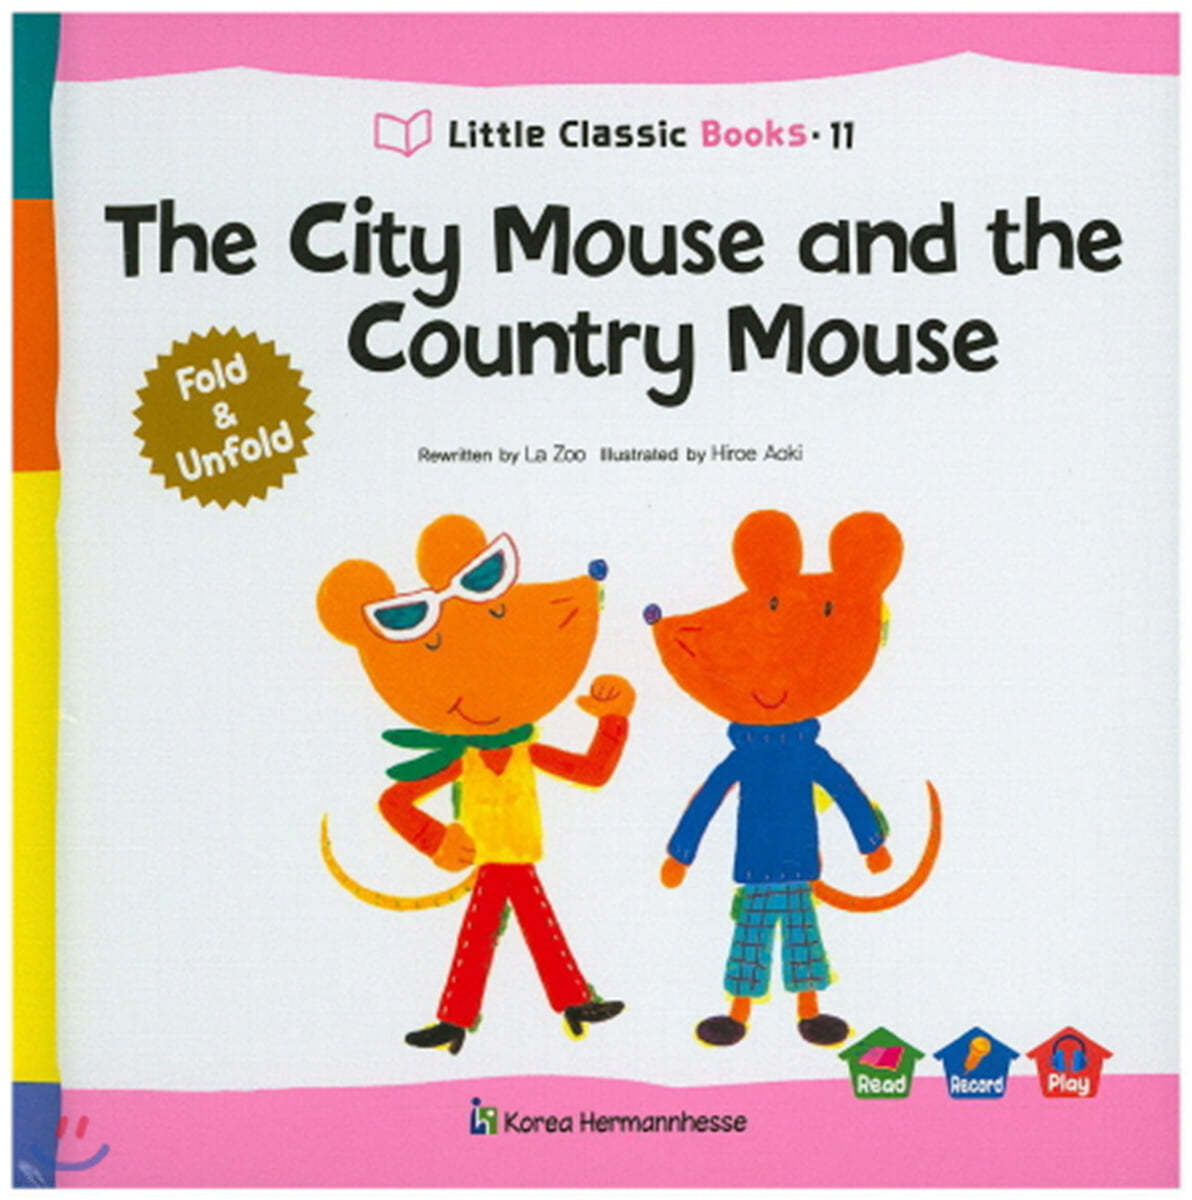 Little Classic Books 11 The City Mouse and the Country Mouse (양장) 리틀 클래식 북스 (영문판)